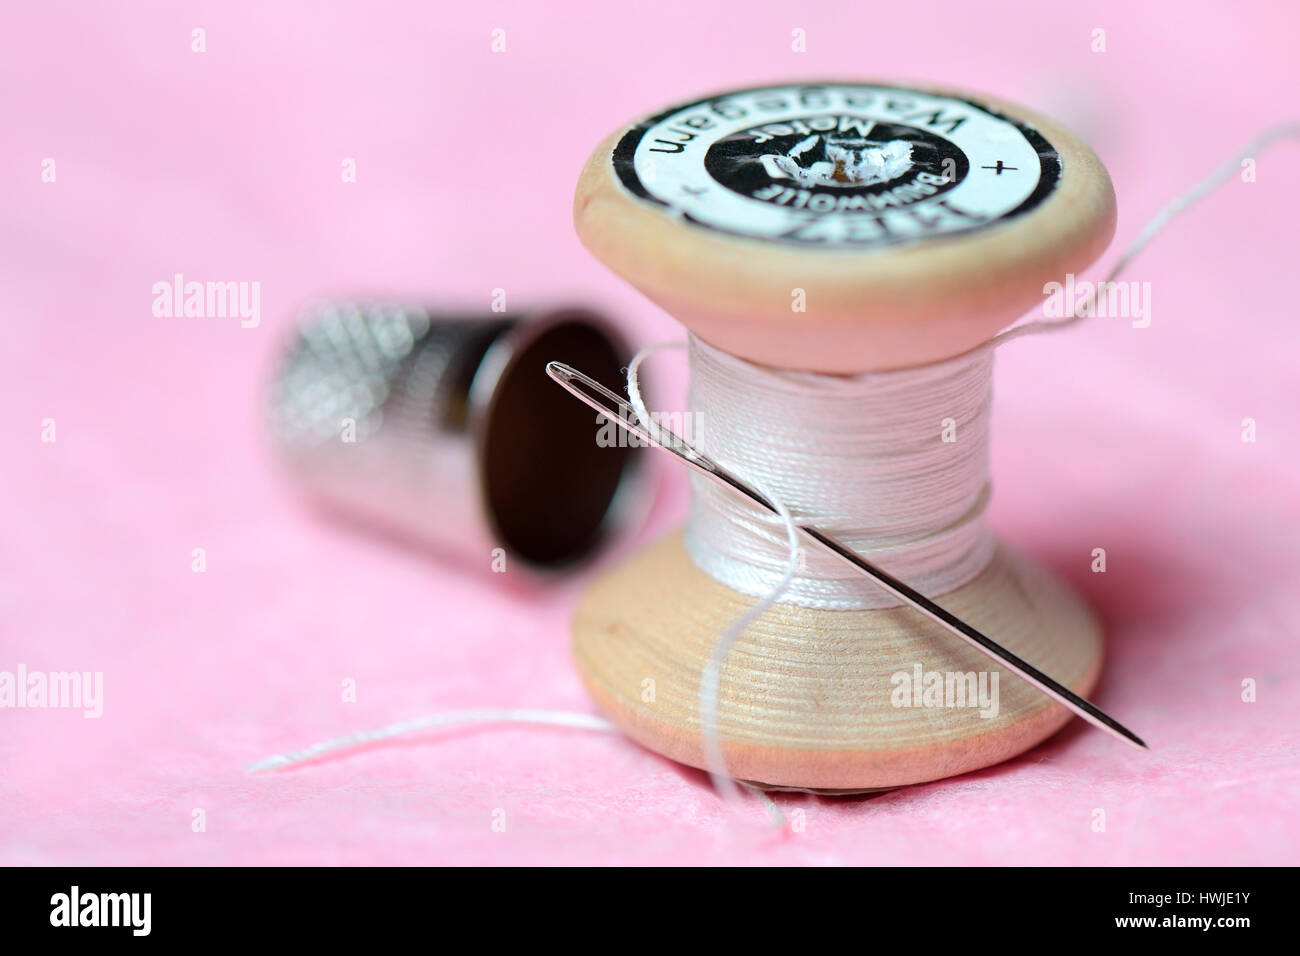 thimble, sewing needle and cotton reel Stock Photo